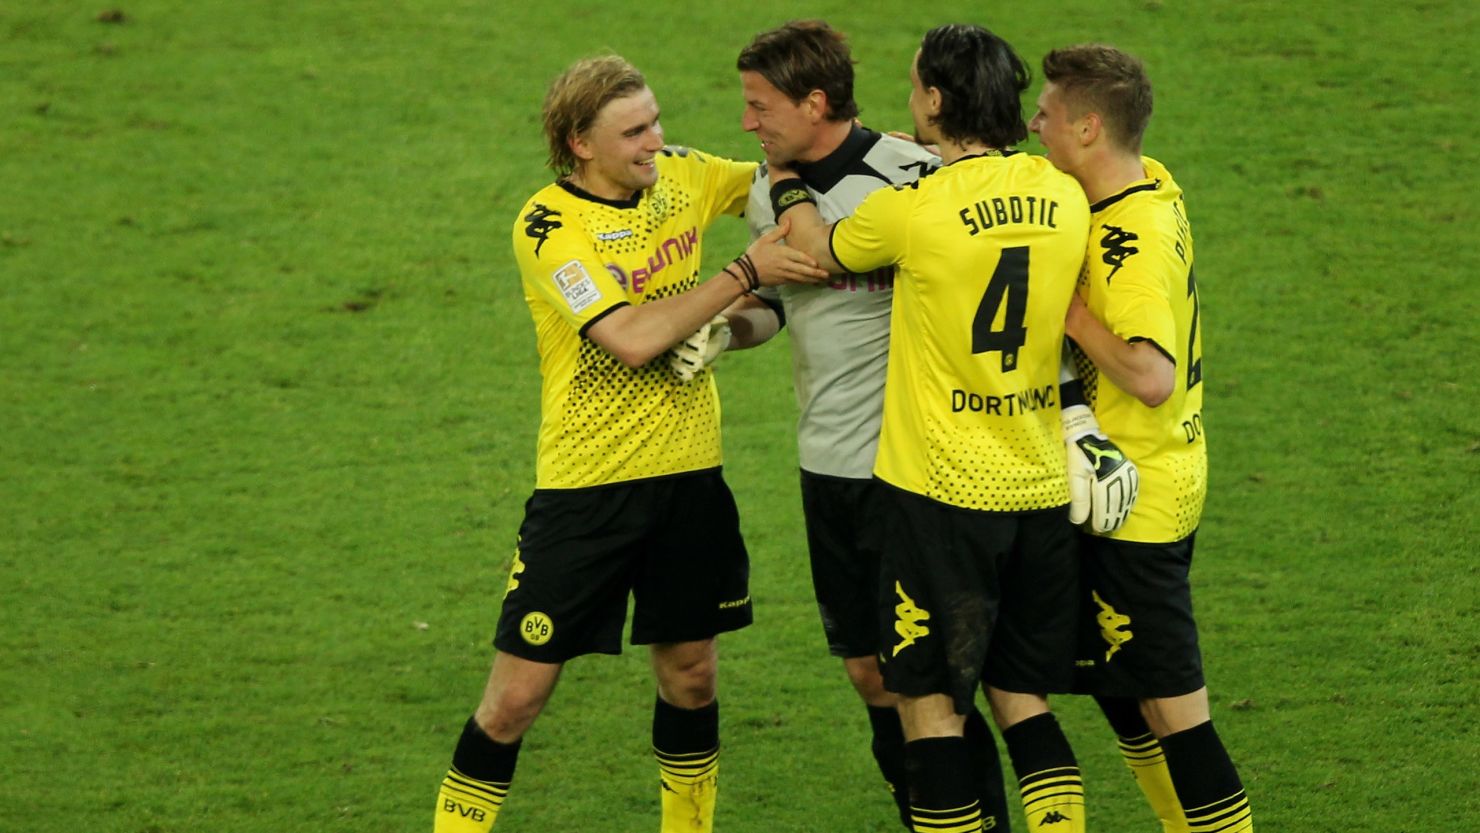 Borussia Dortmund's players celebrate after their vital 1-0 home win over Bayern Munich.